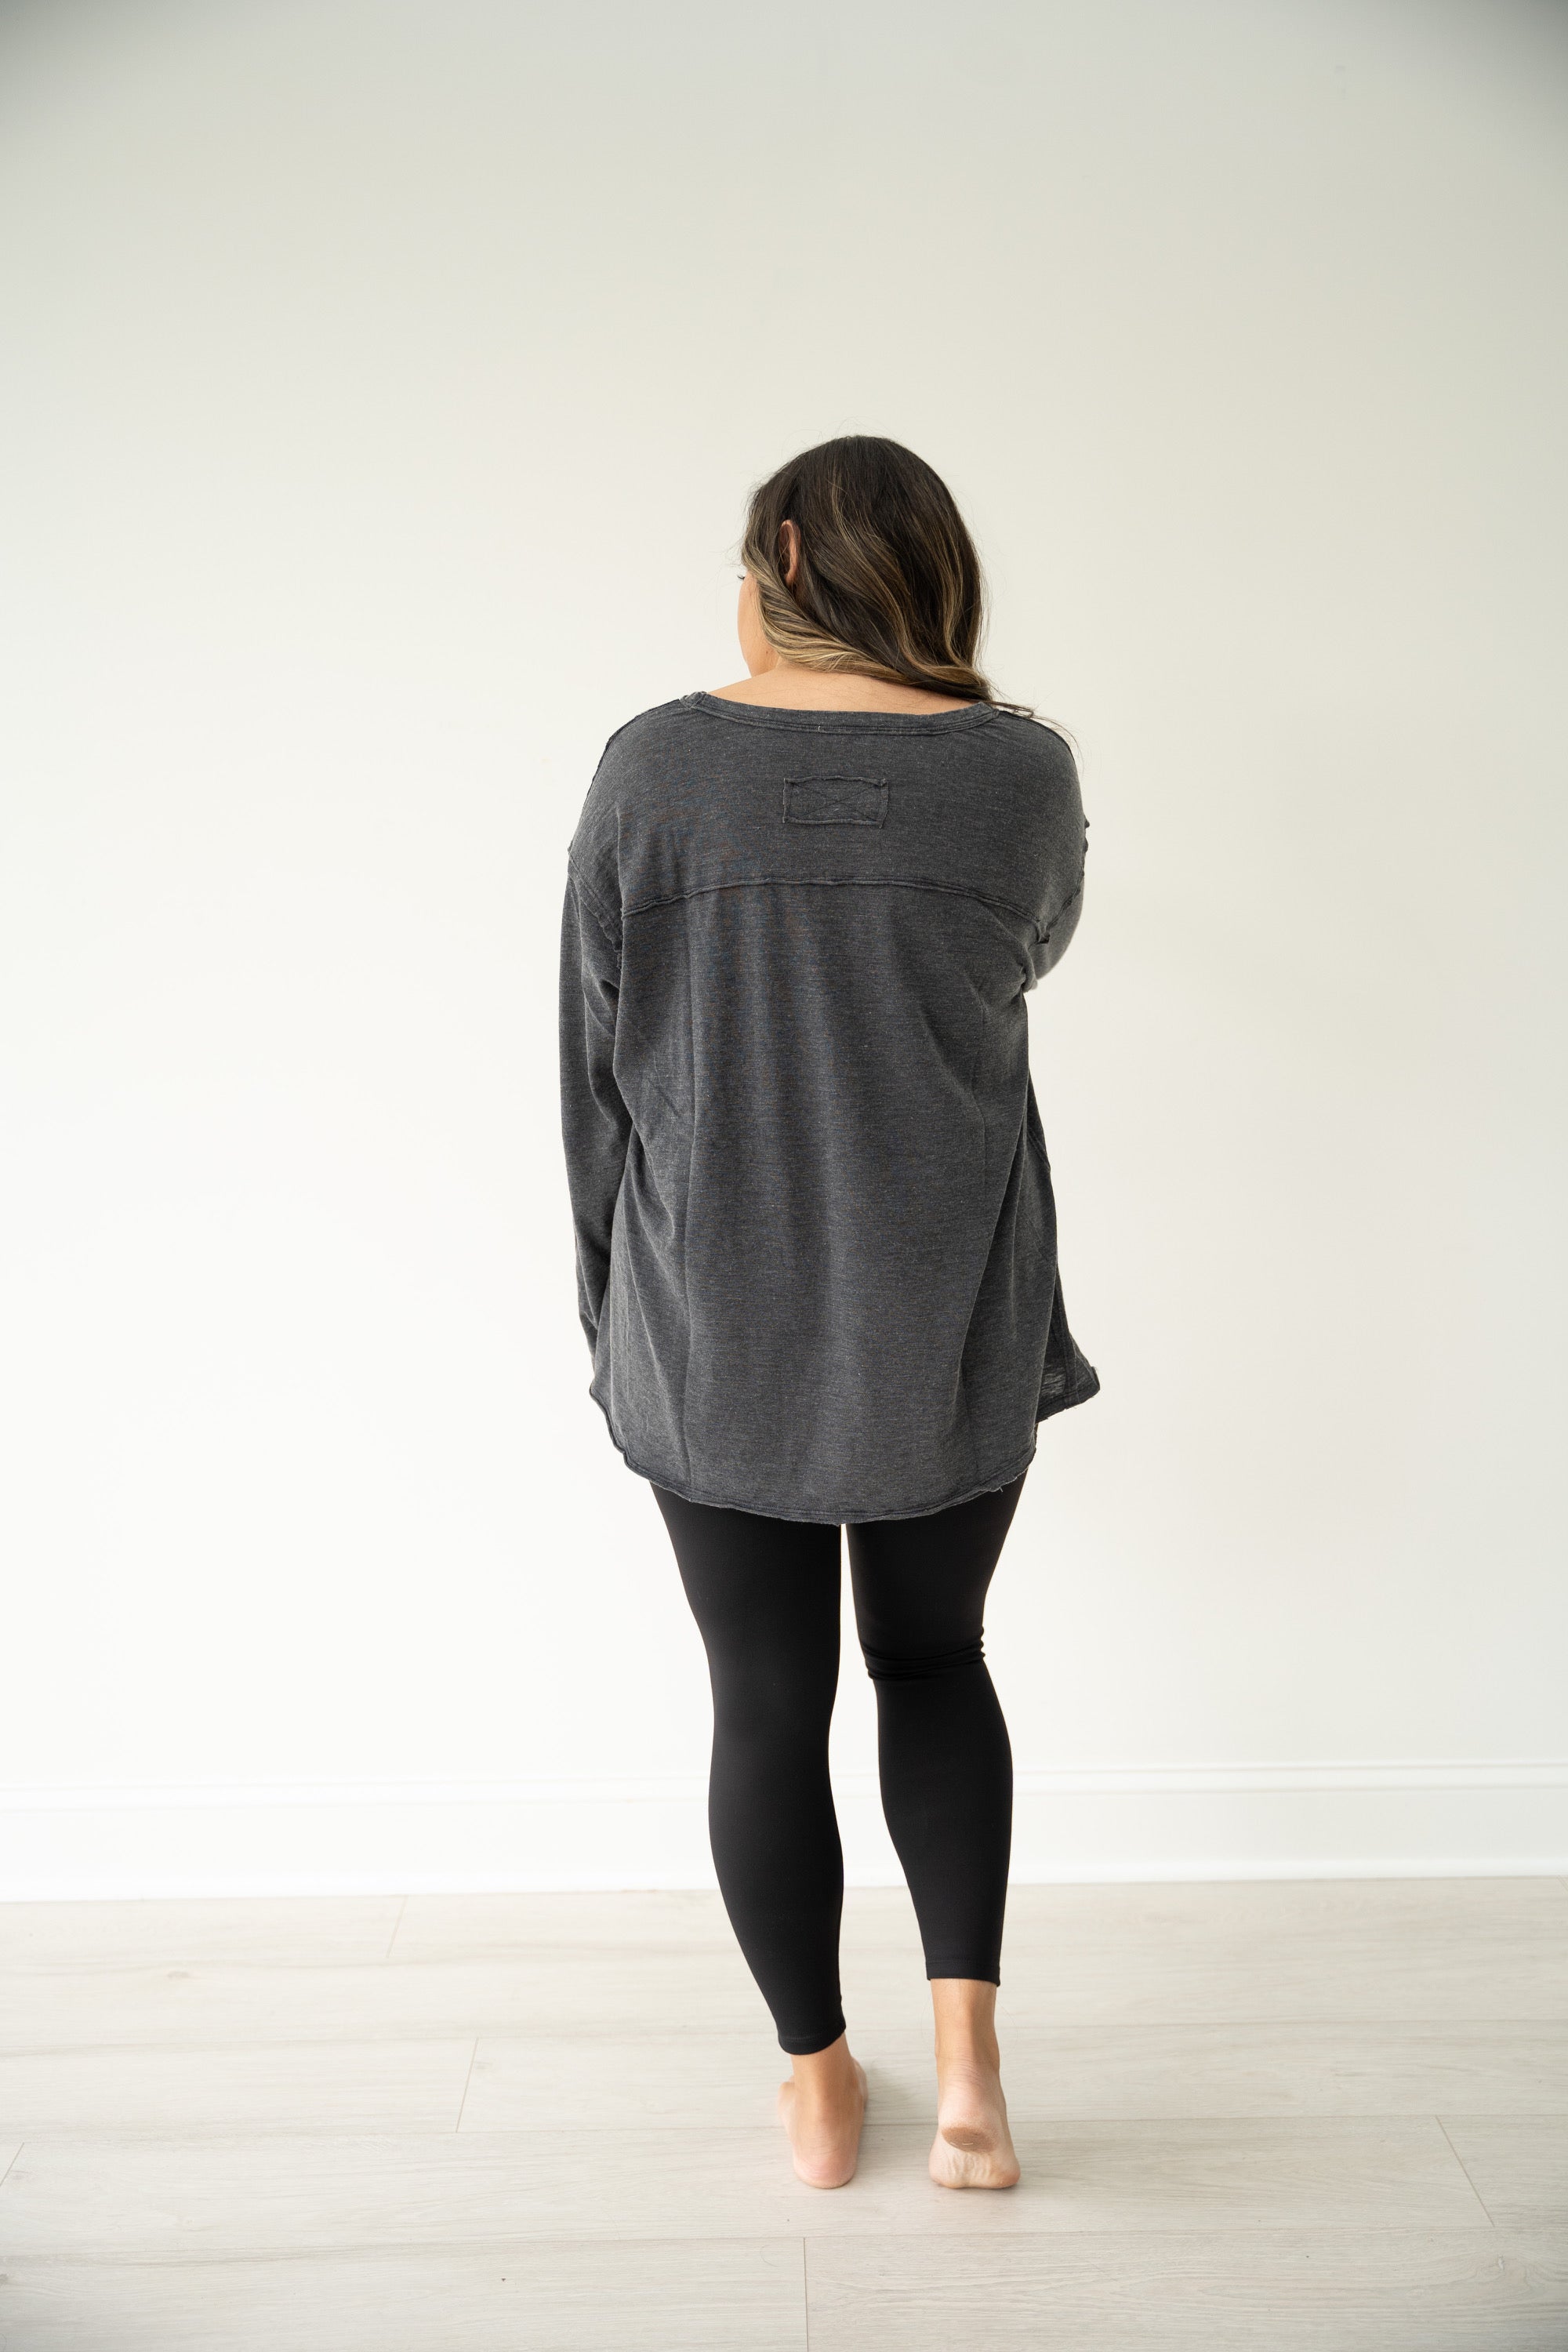 Oversized pocket front tee in Heathered Black.